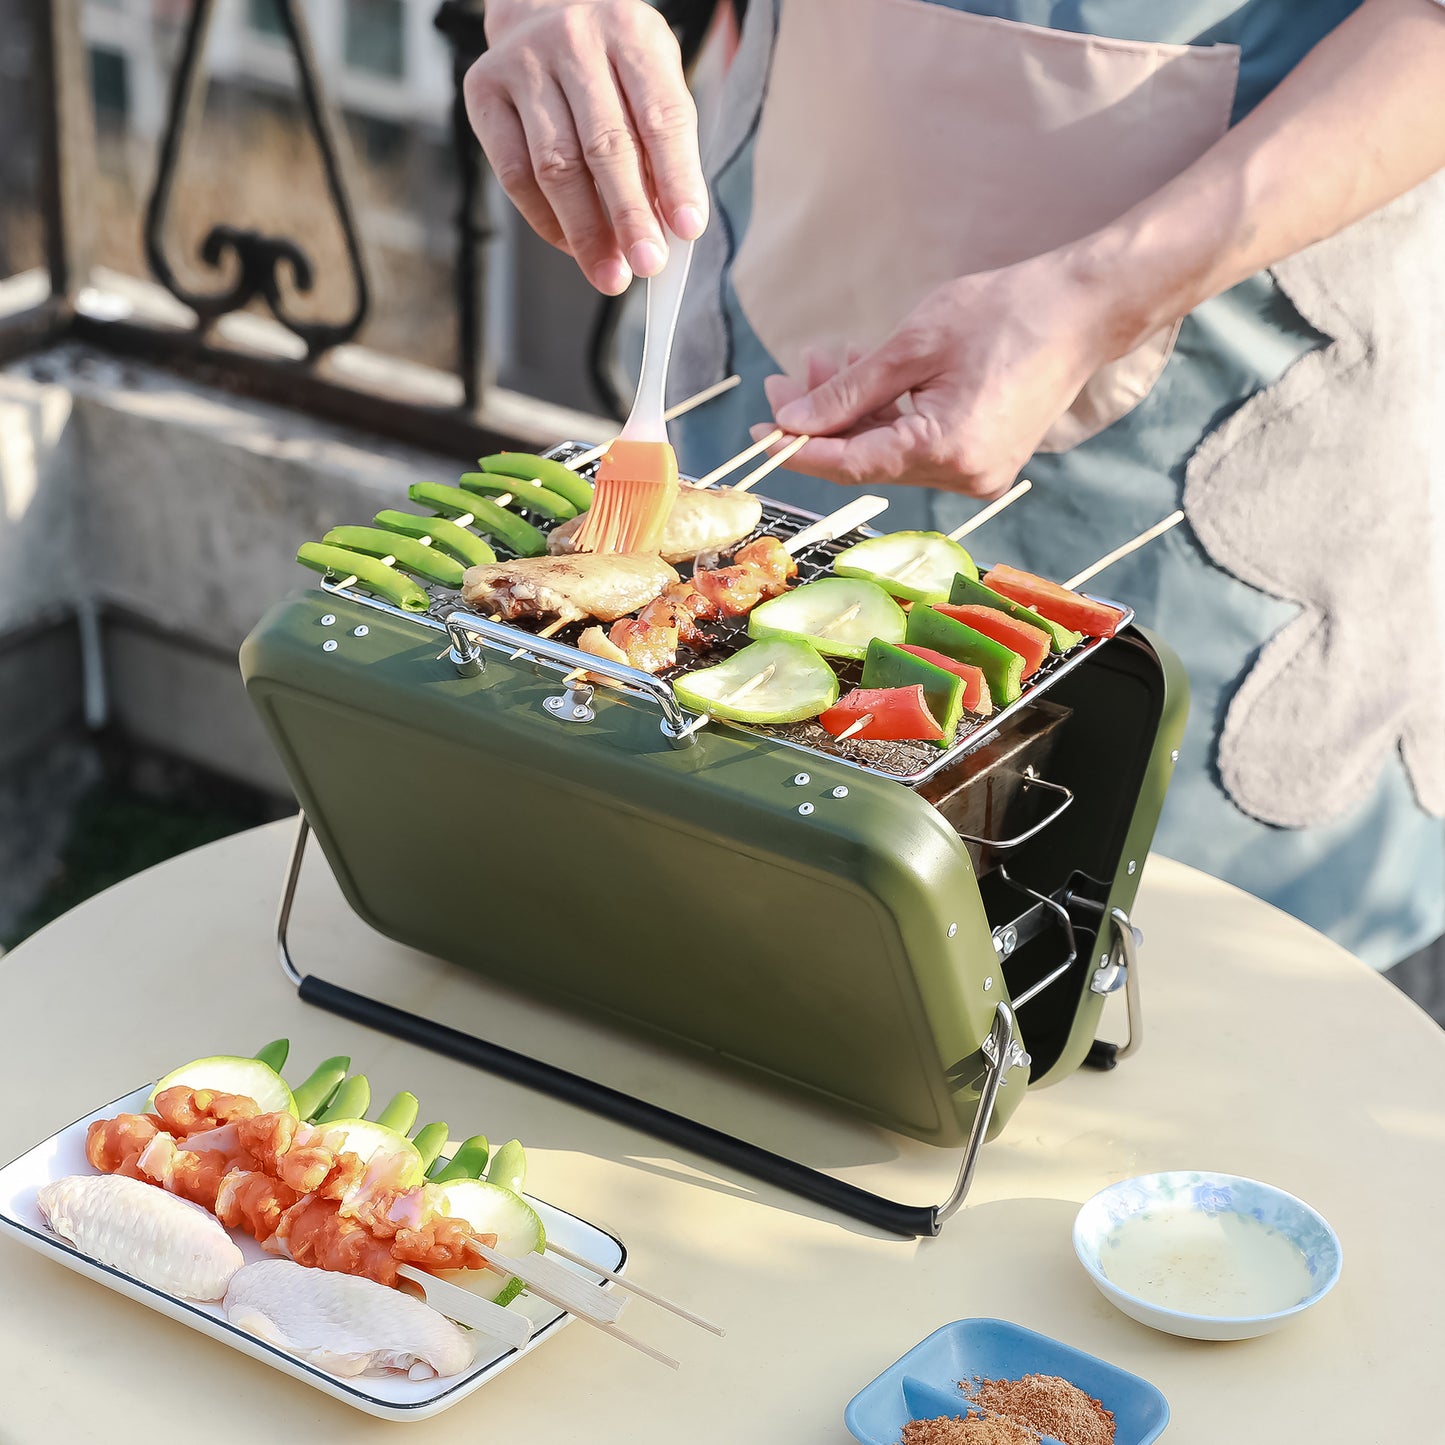 Easy Travel Portable Charcoal Outdoor Grill